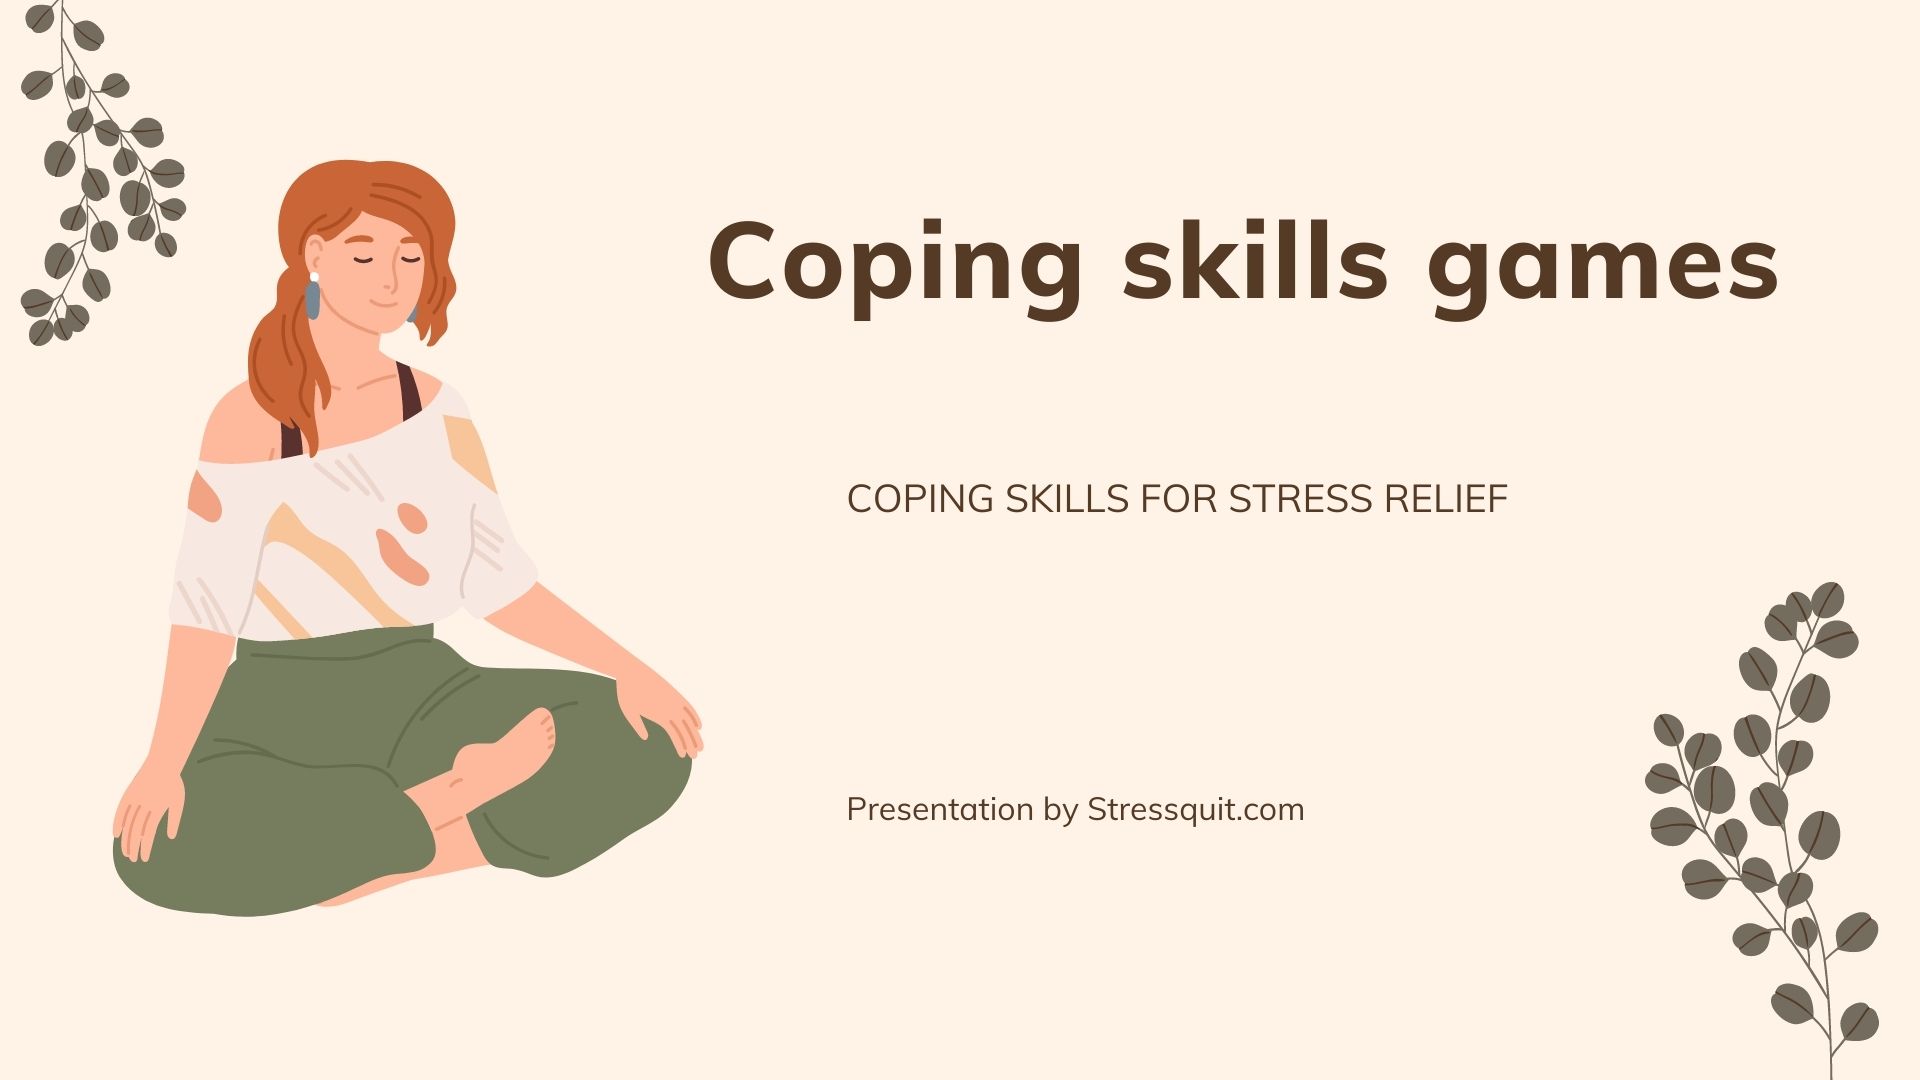 Why is it important to have coping skills games for stress relief?